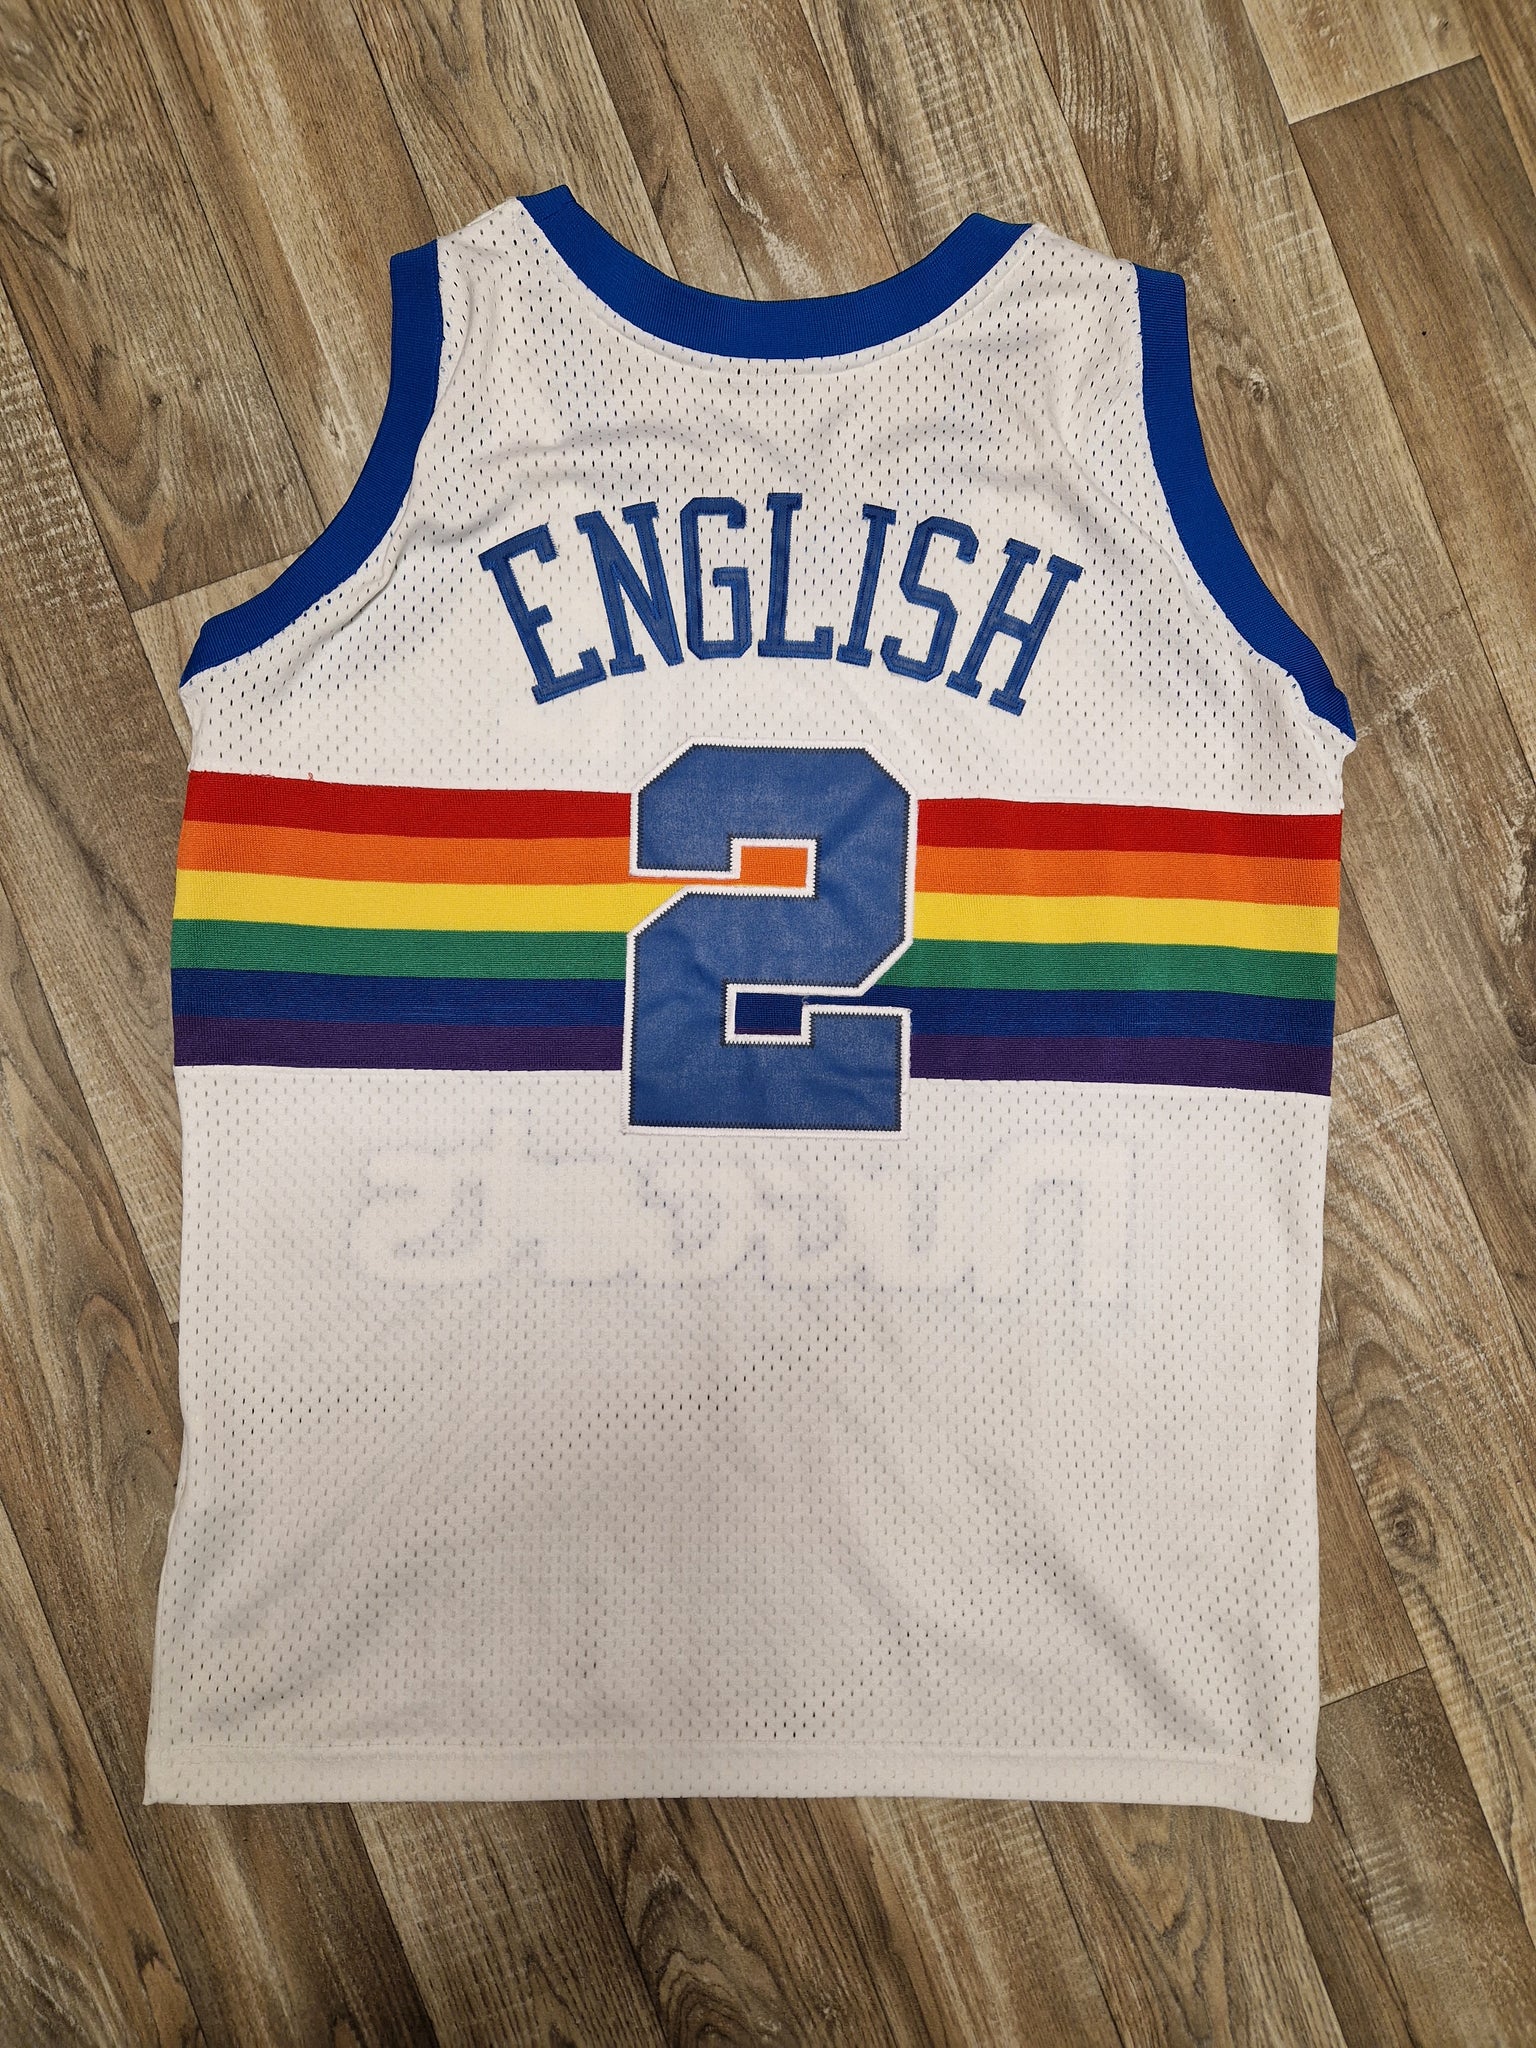 🏀 Alex English Denver Nuggets Jersey Size Medium – The Throwback Store 🏀